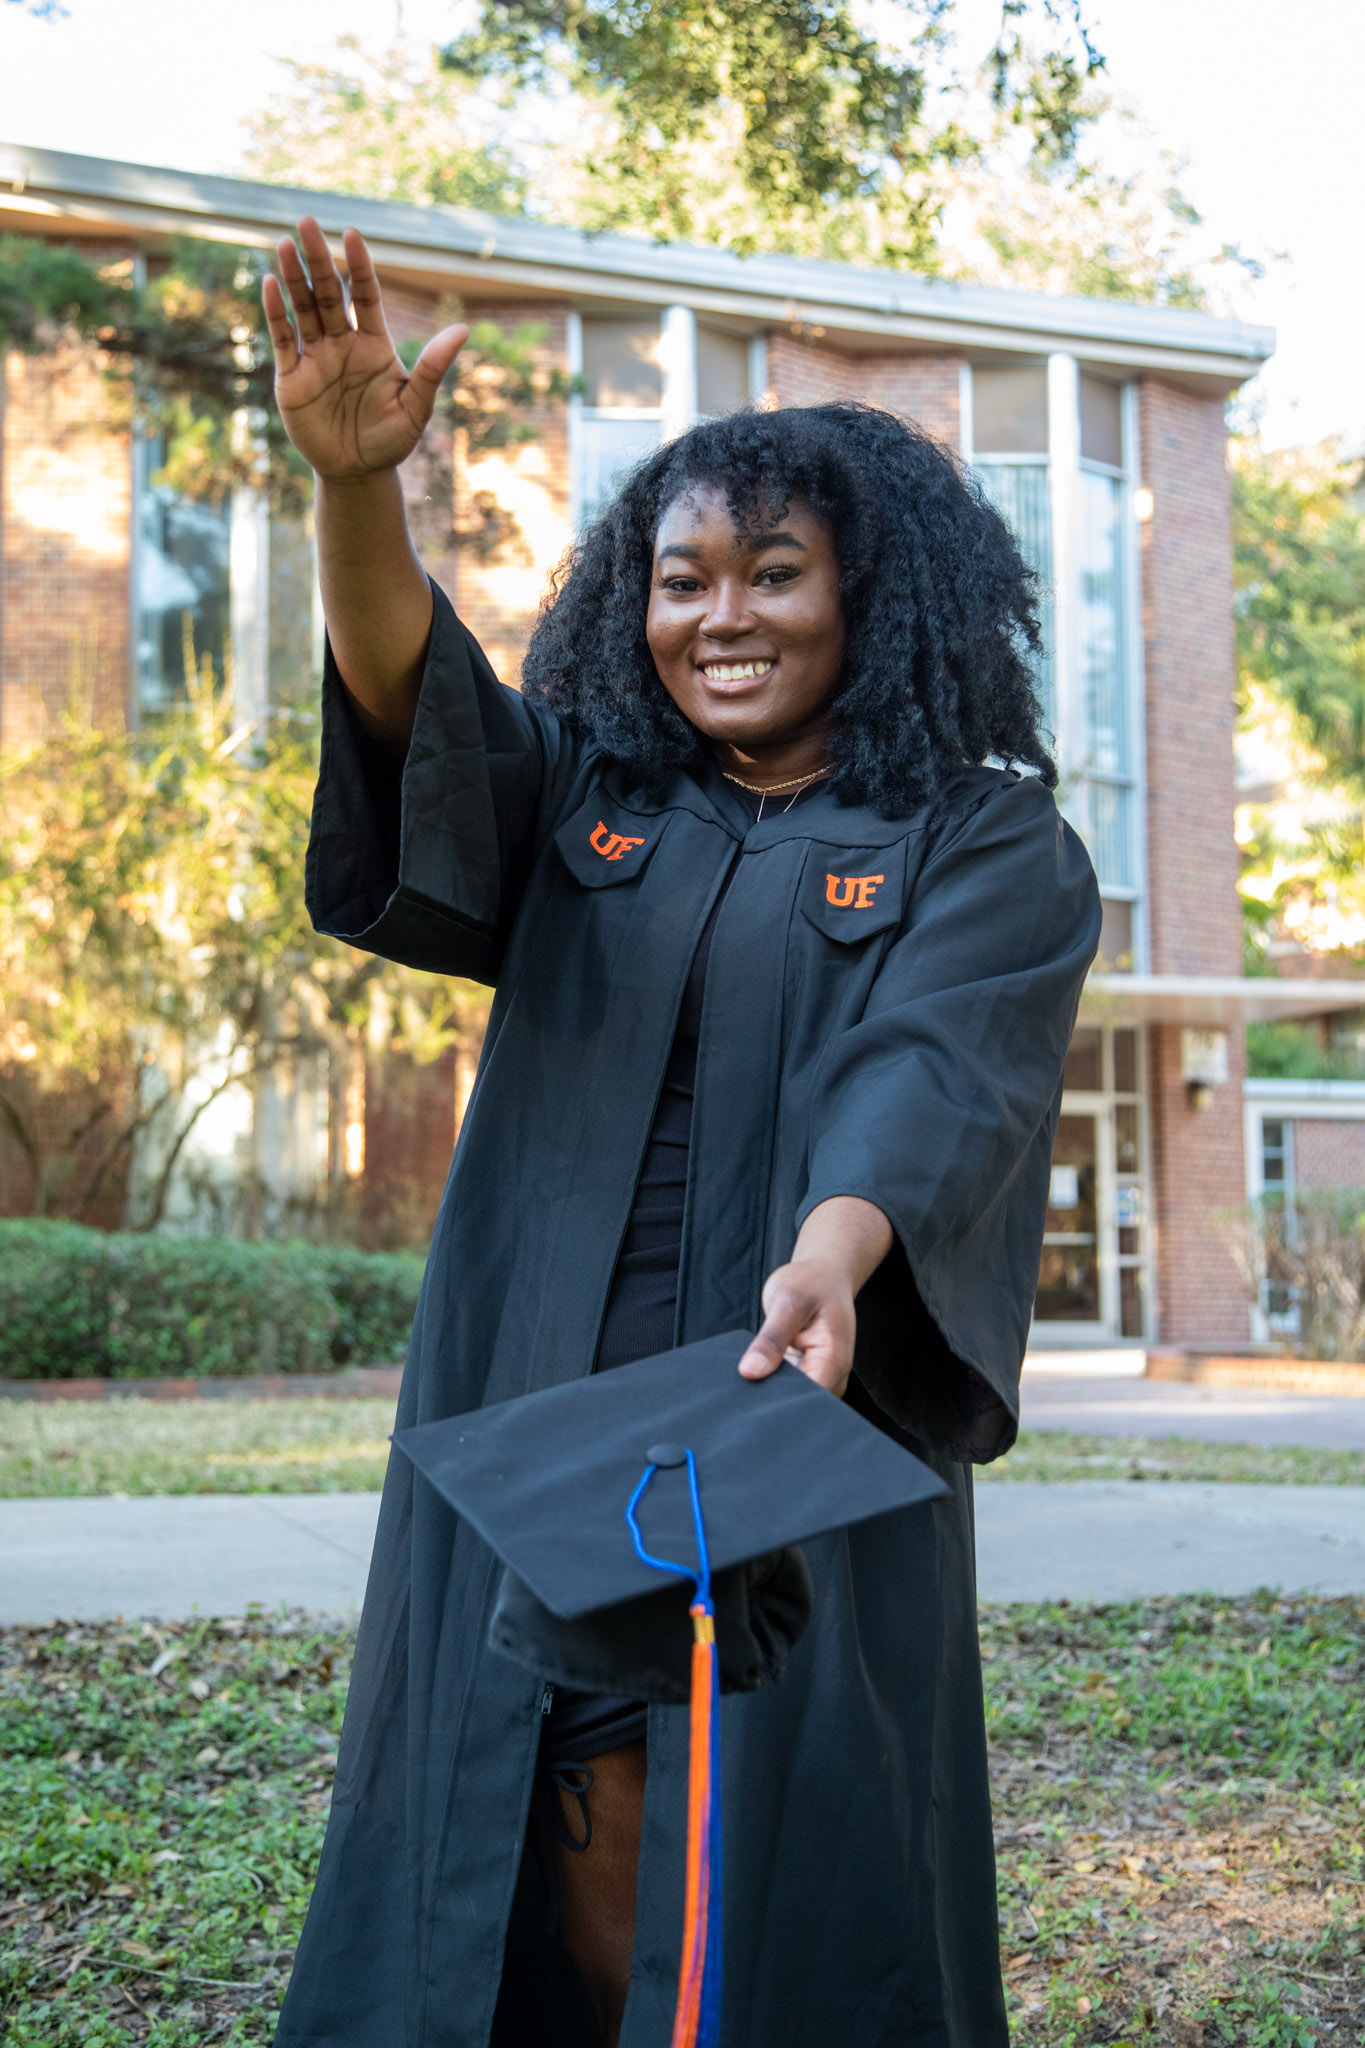 A student dressed in a graduation gown does a gator chomp.